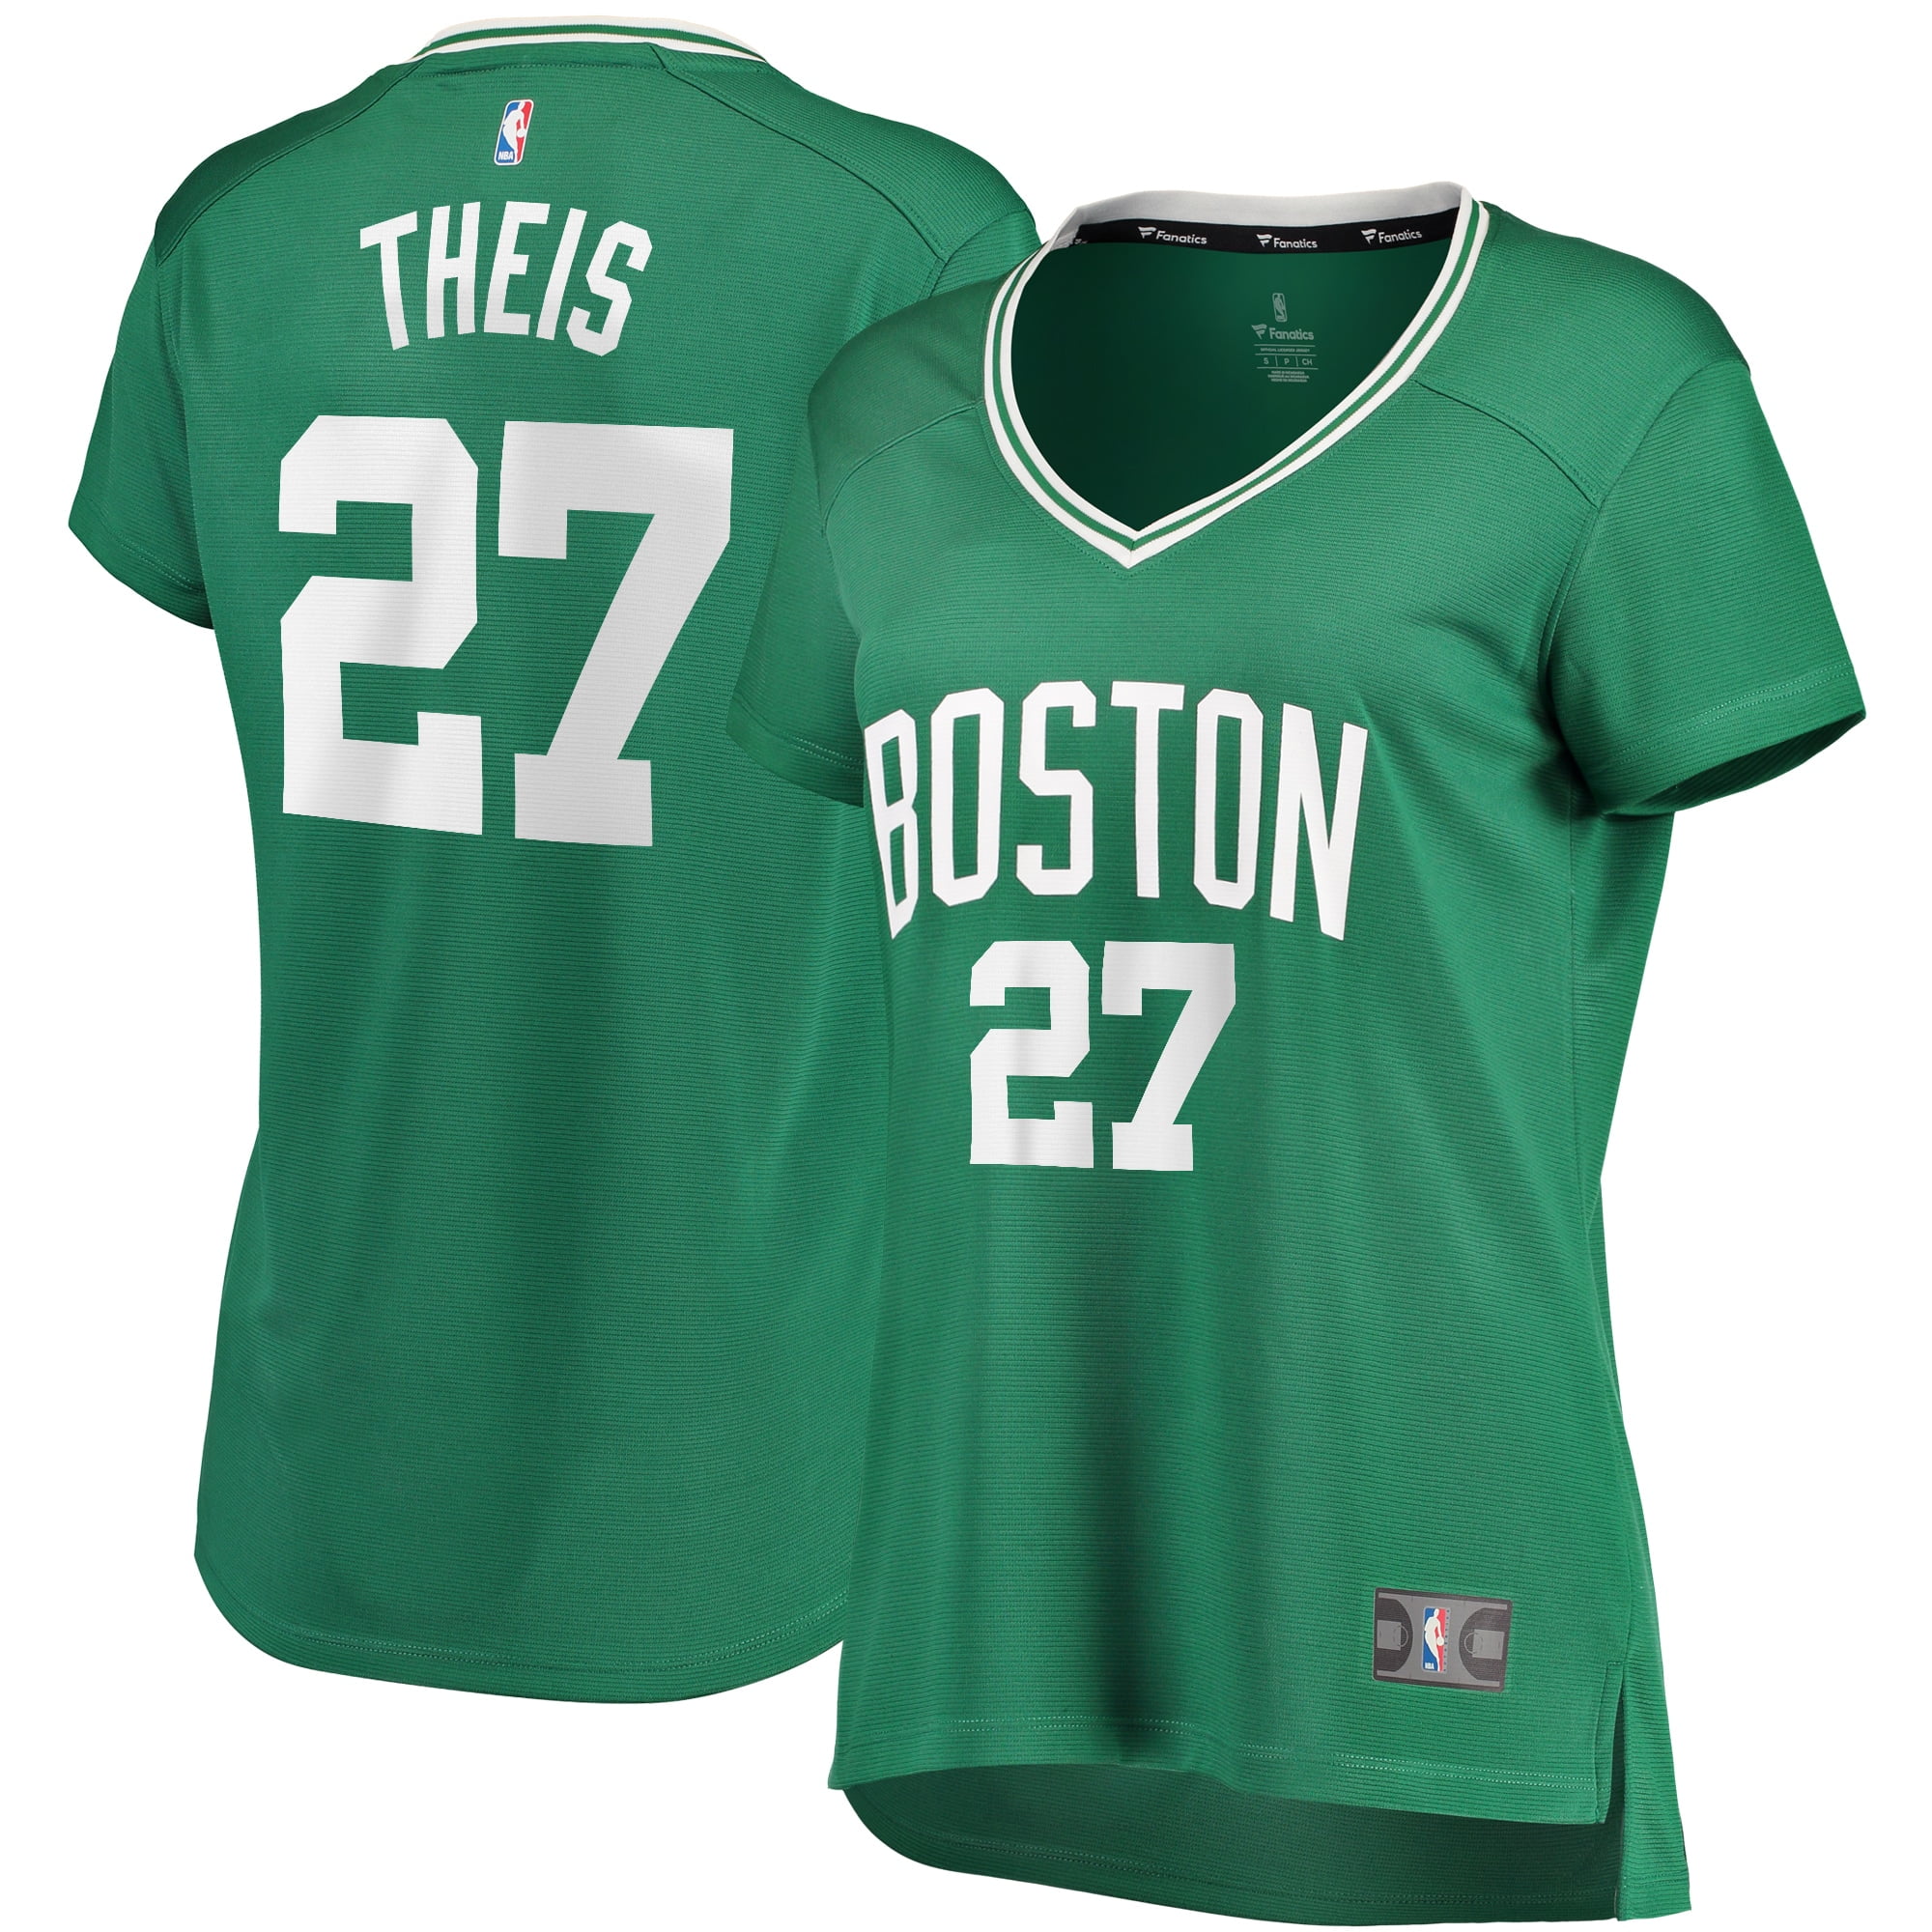 theis jersey